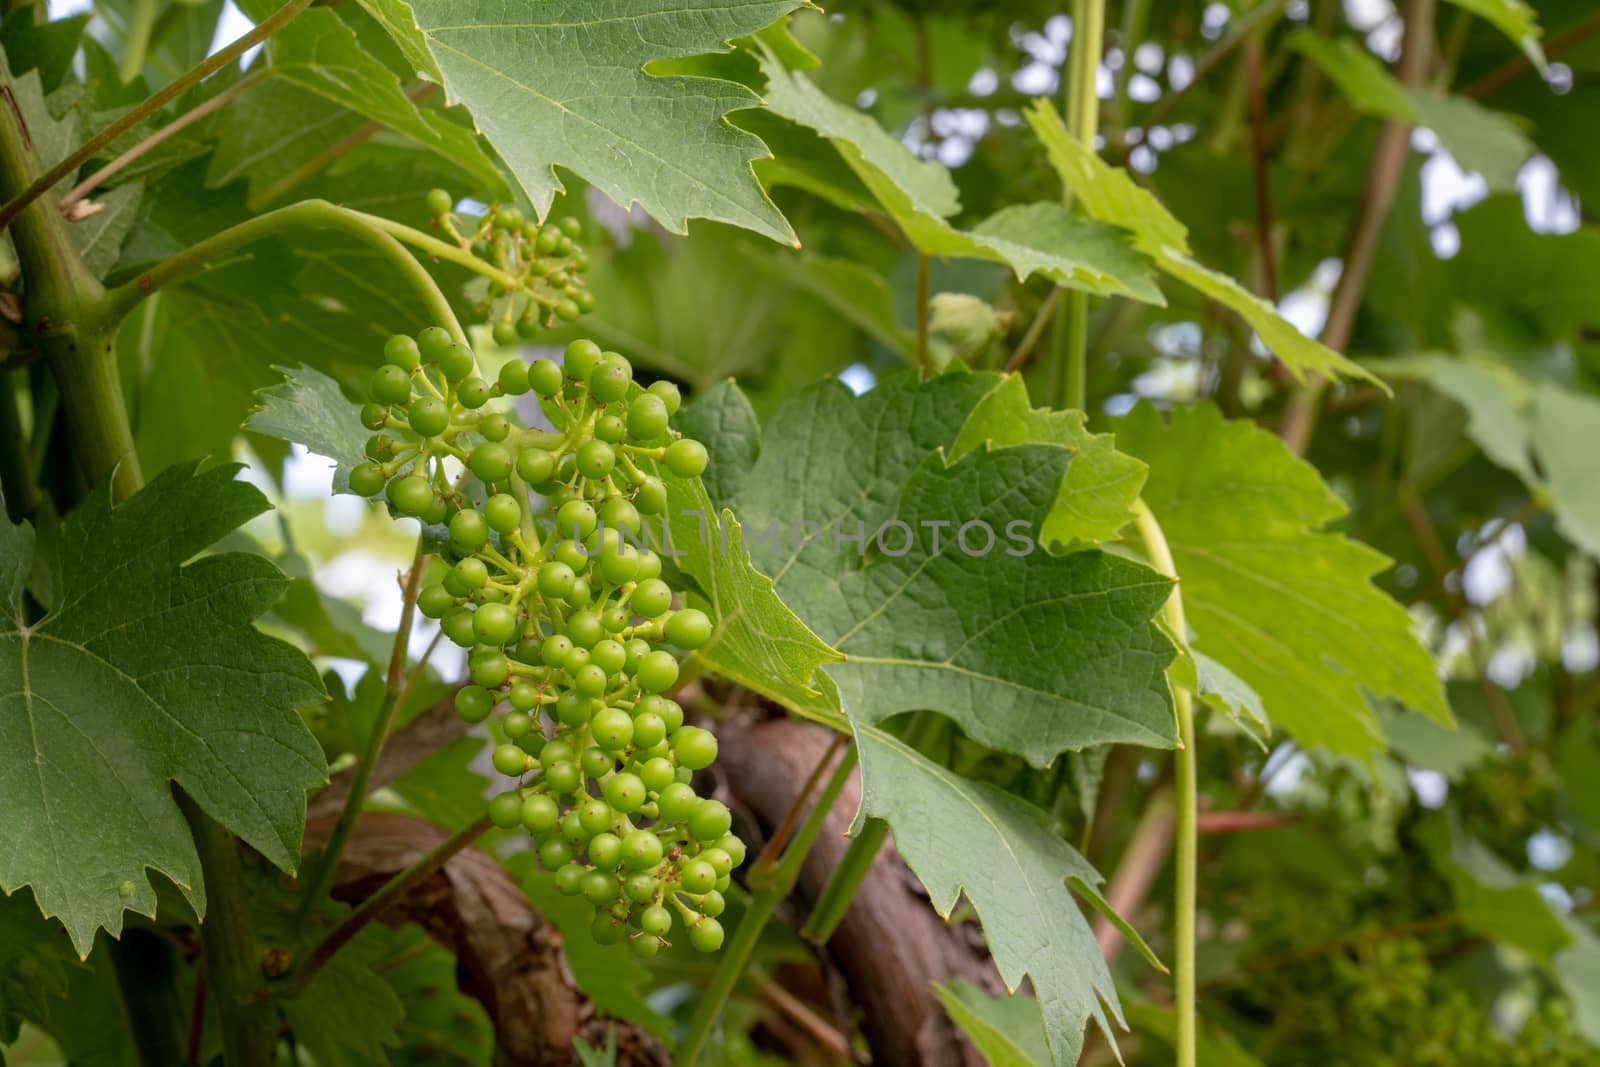 Green, unripe, young wine grapes in vineyard, early summer, close-up by asafaric